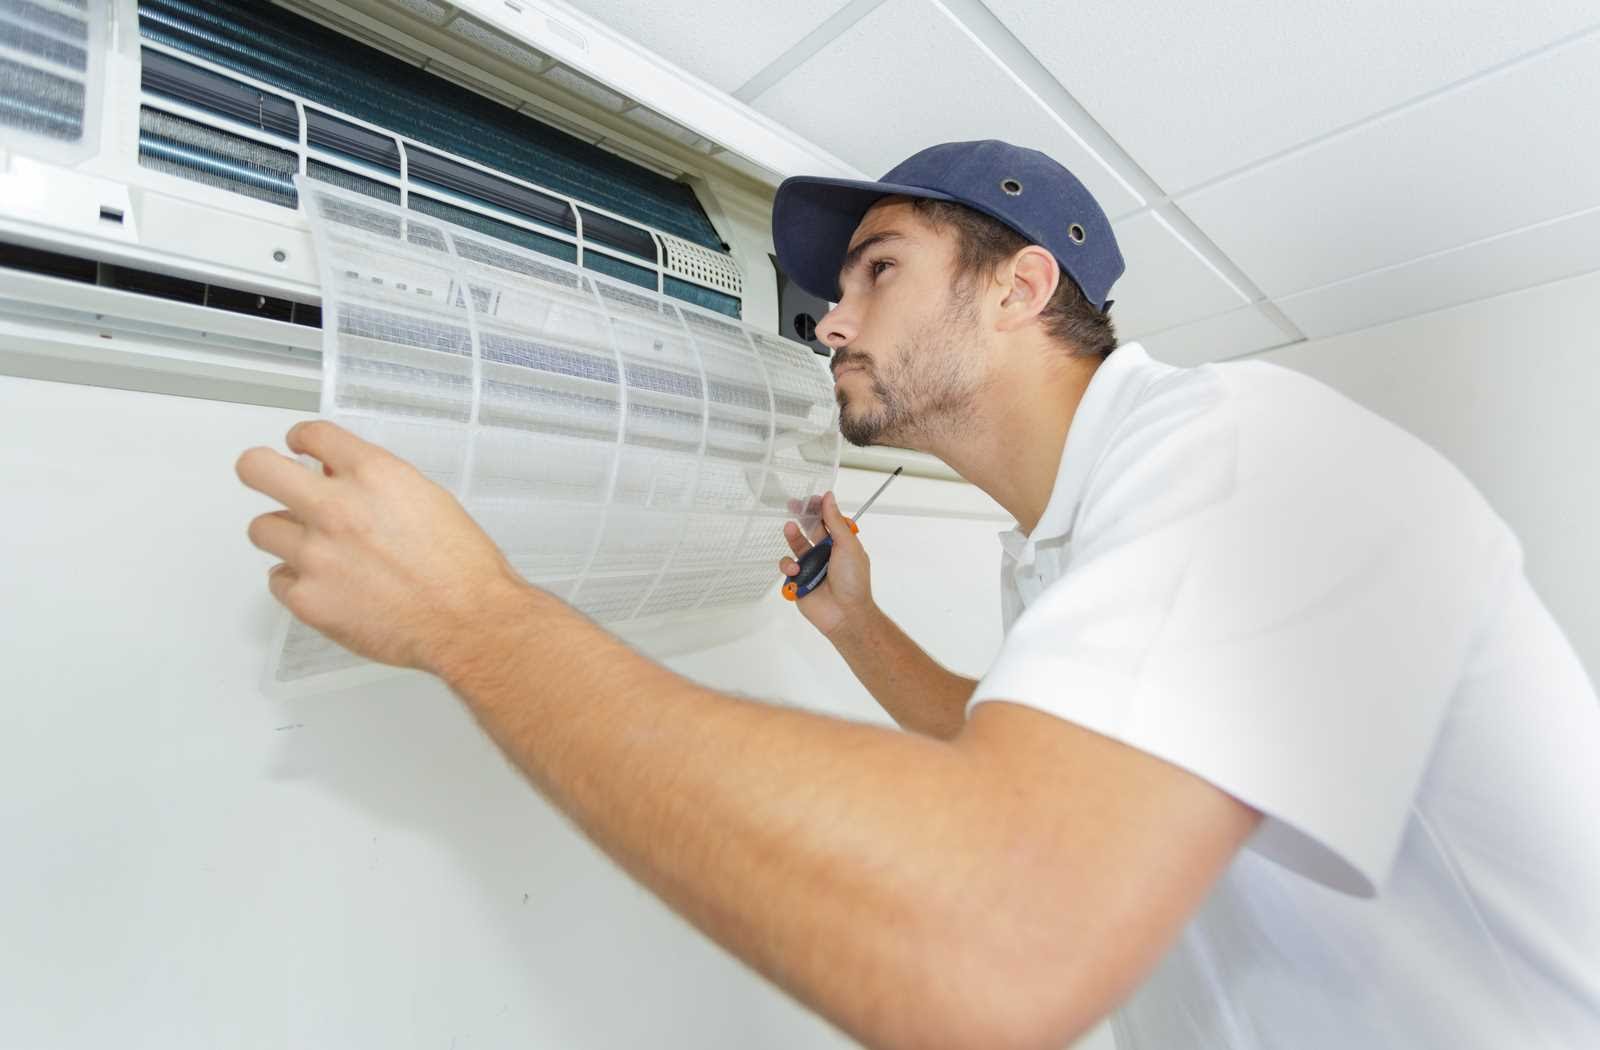 What to do About Weird Noises Coming From Your Air Conditioner